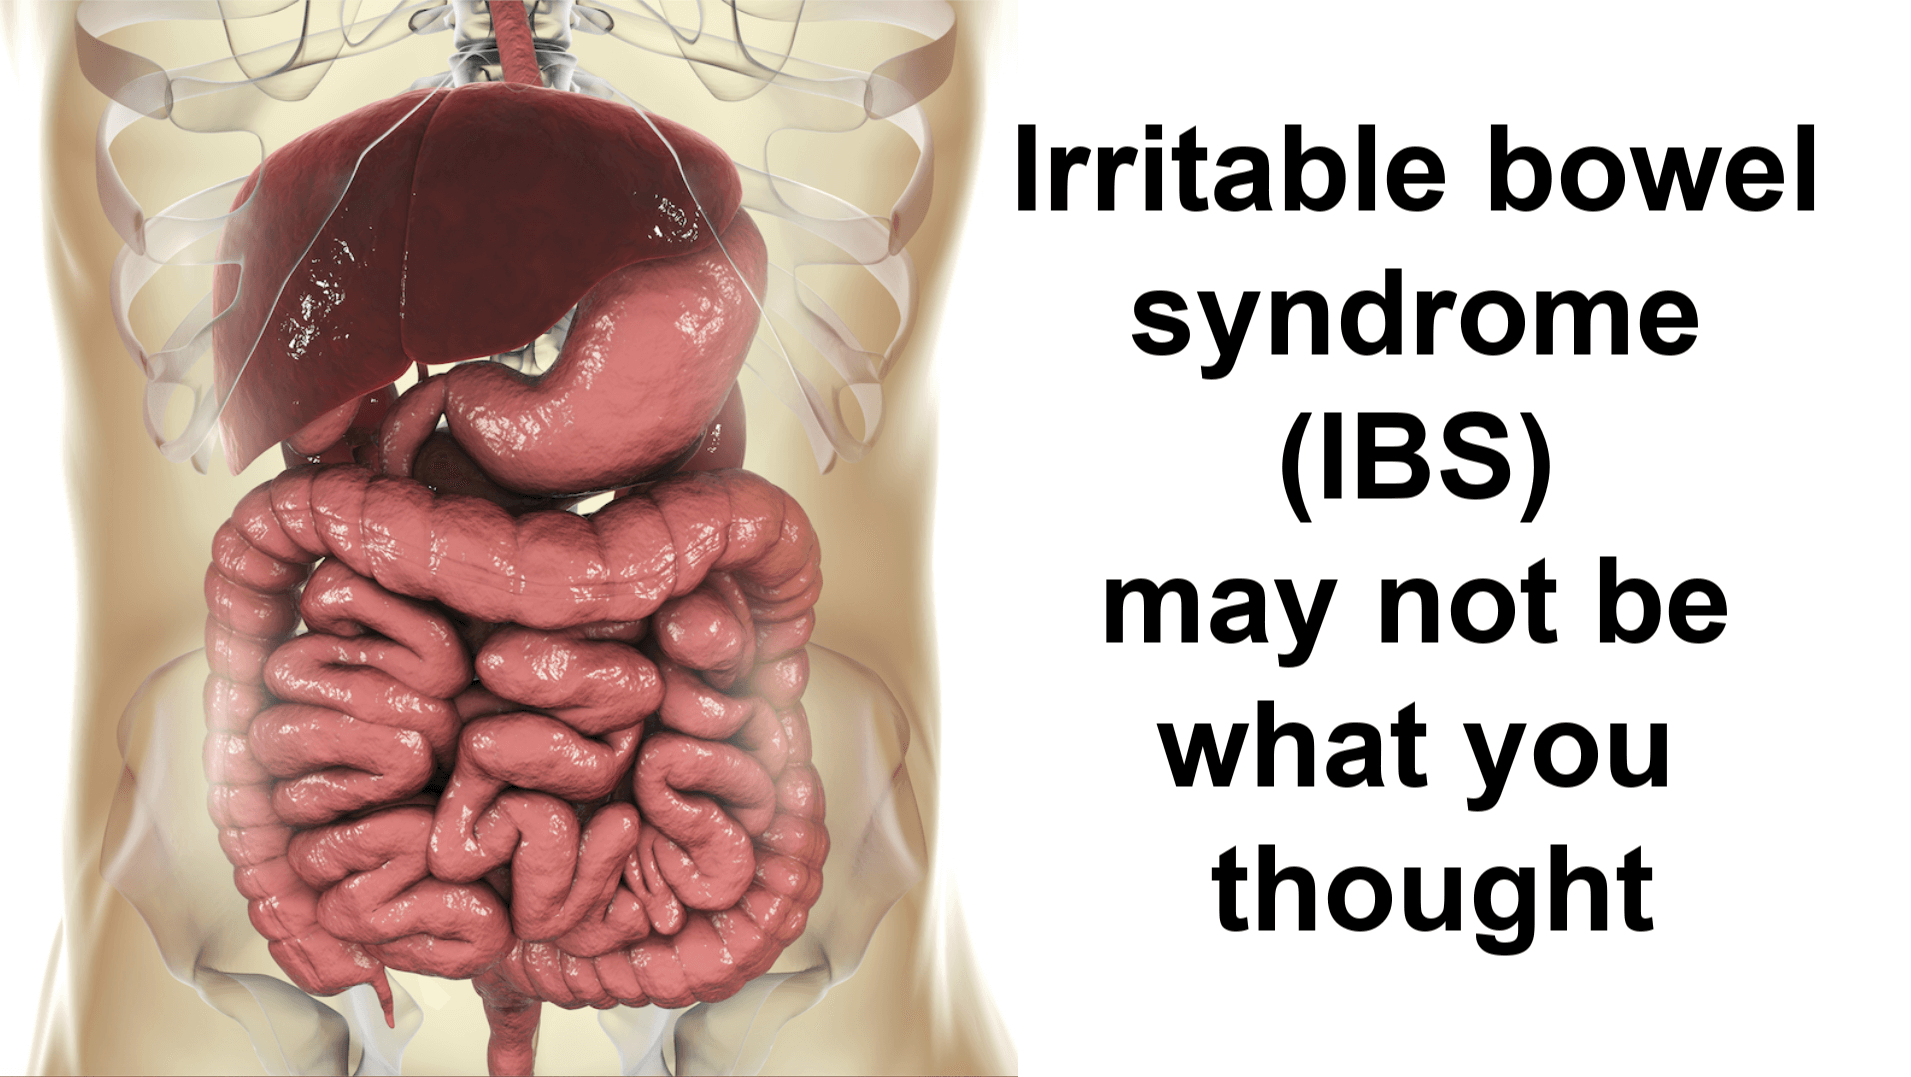 Irritable bowel syndrome (IBS) may not be what you thought ...